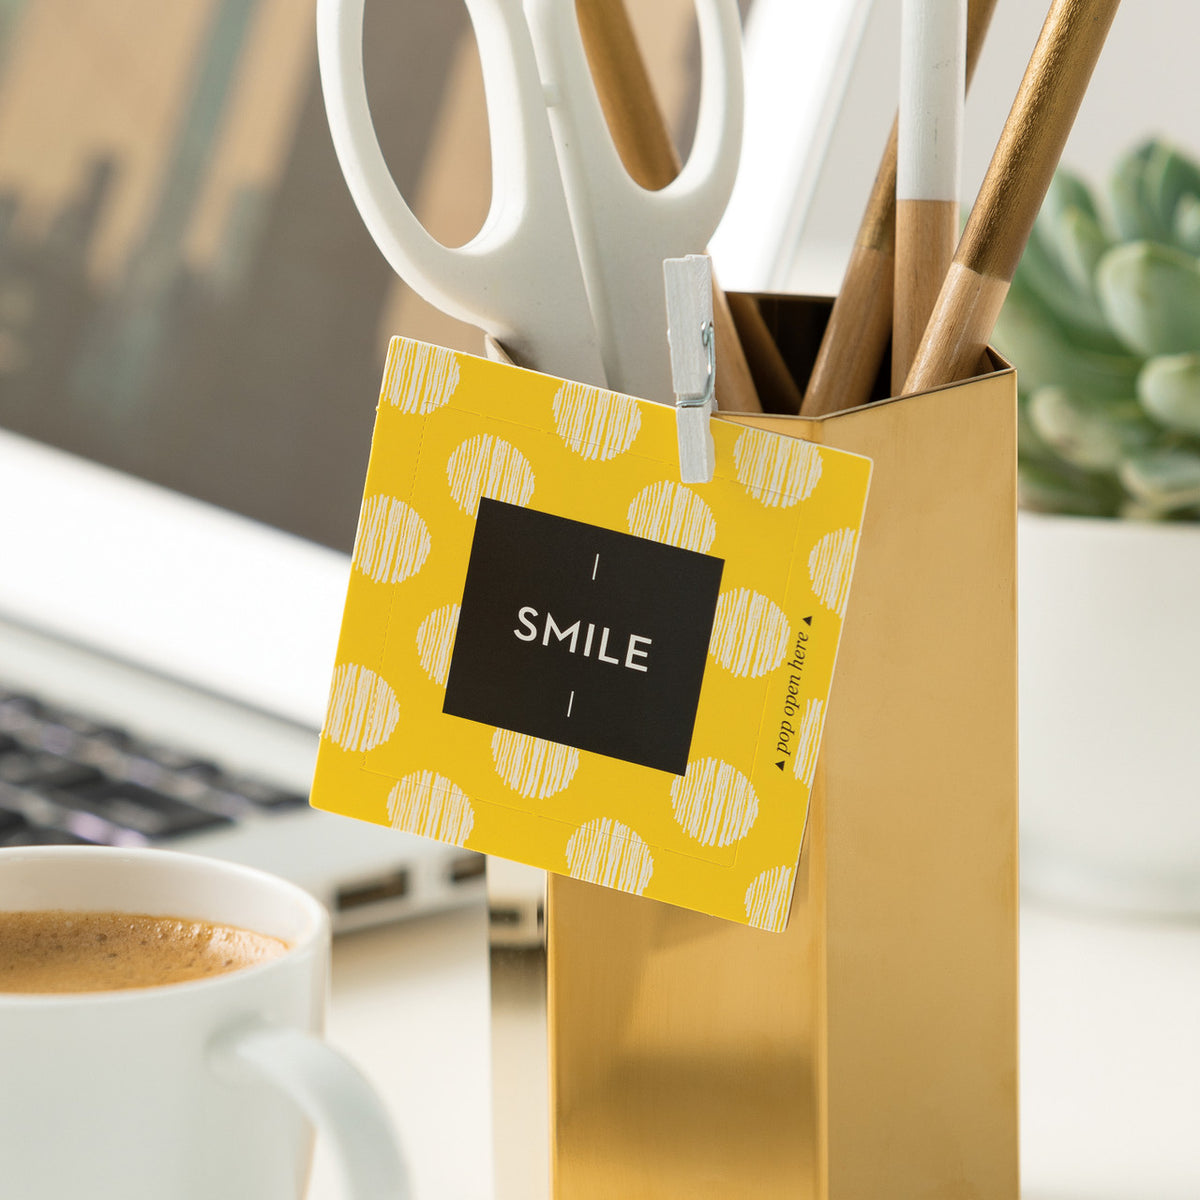 Smile card attached to pencil holder on a desk